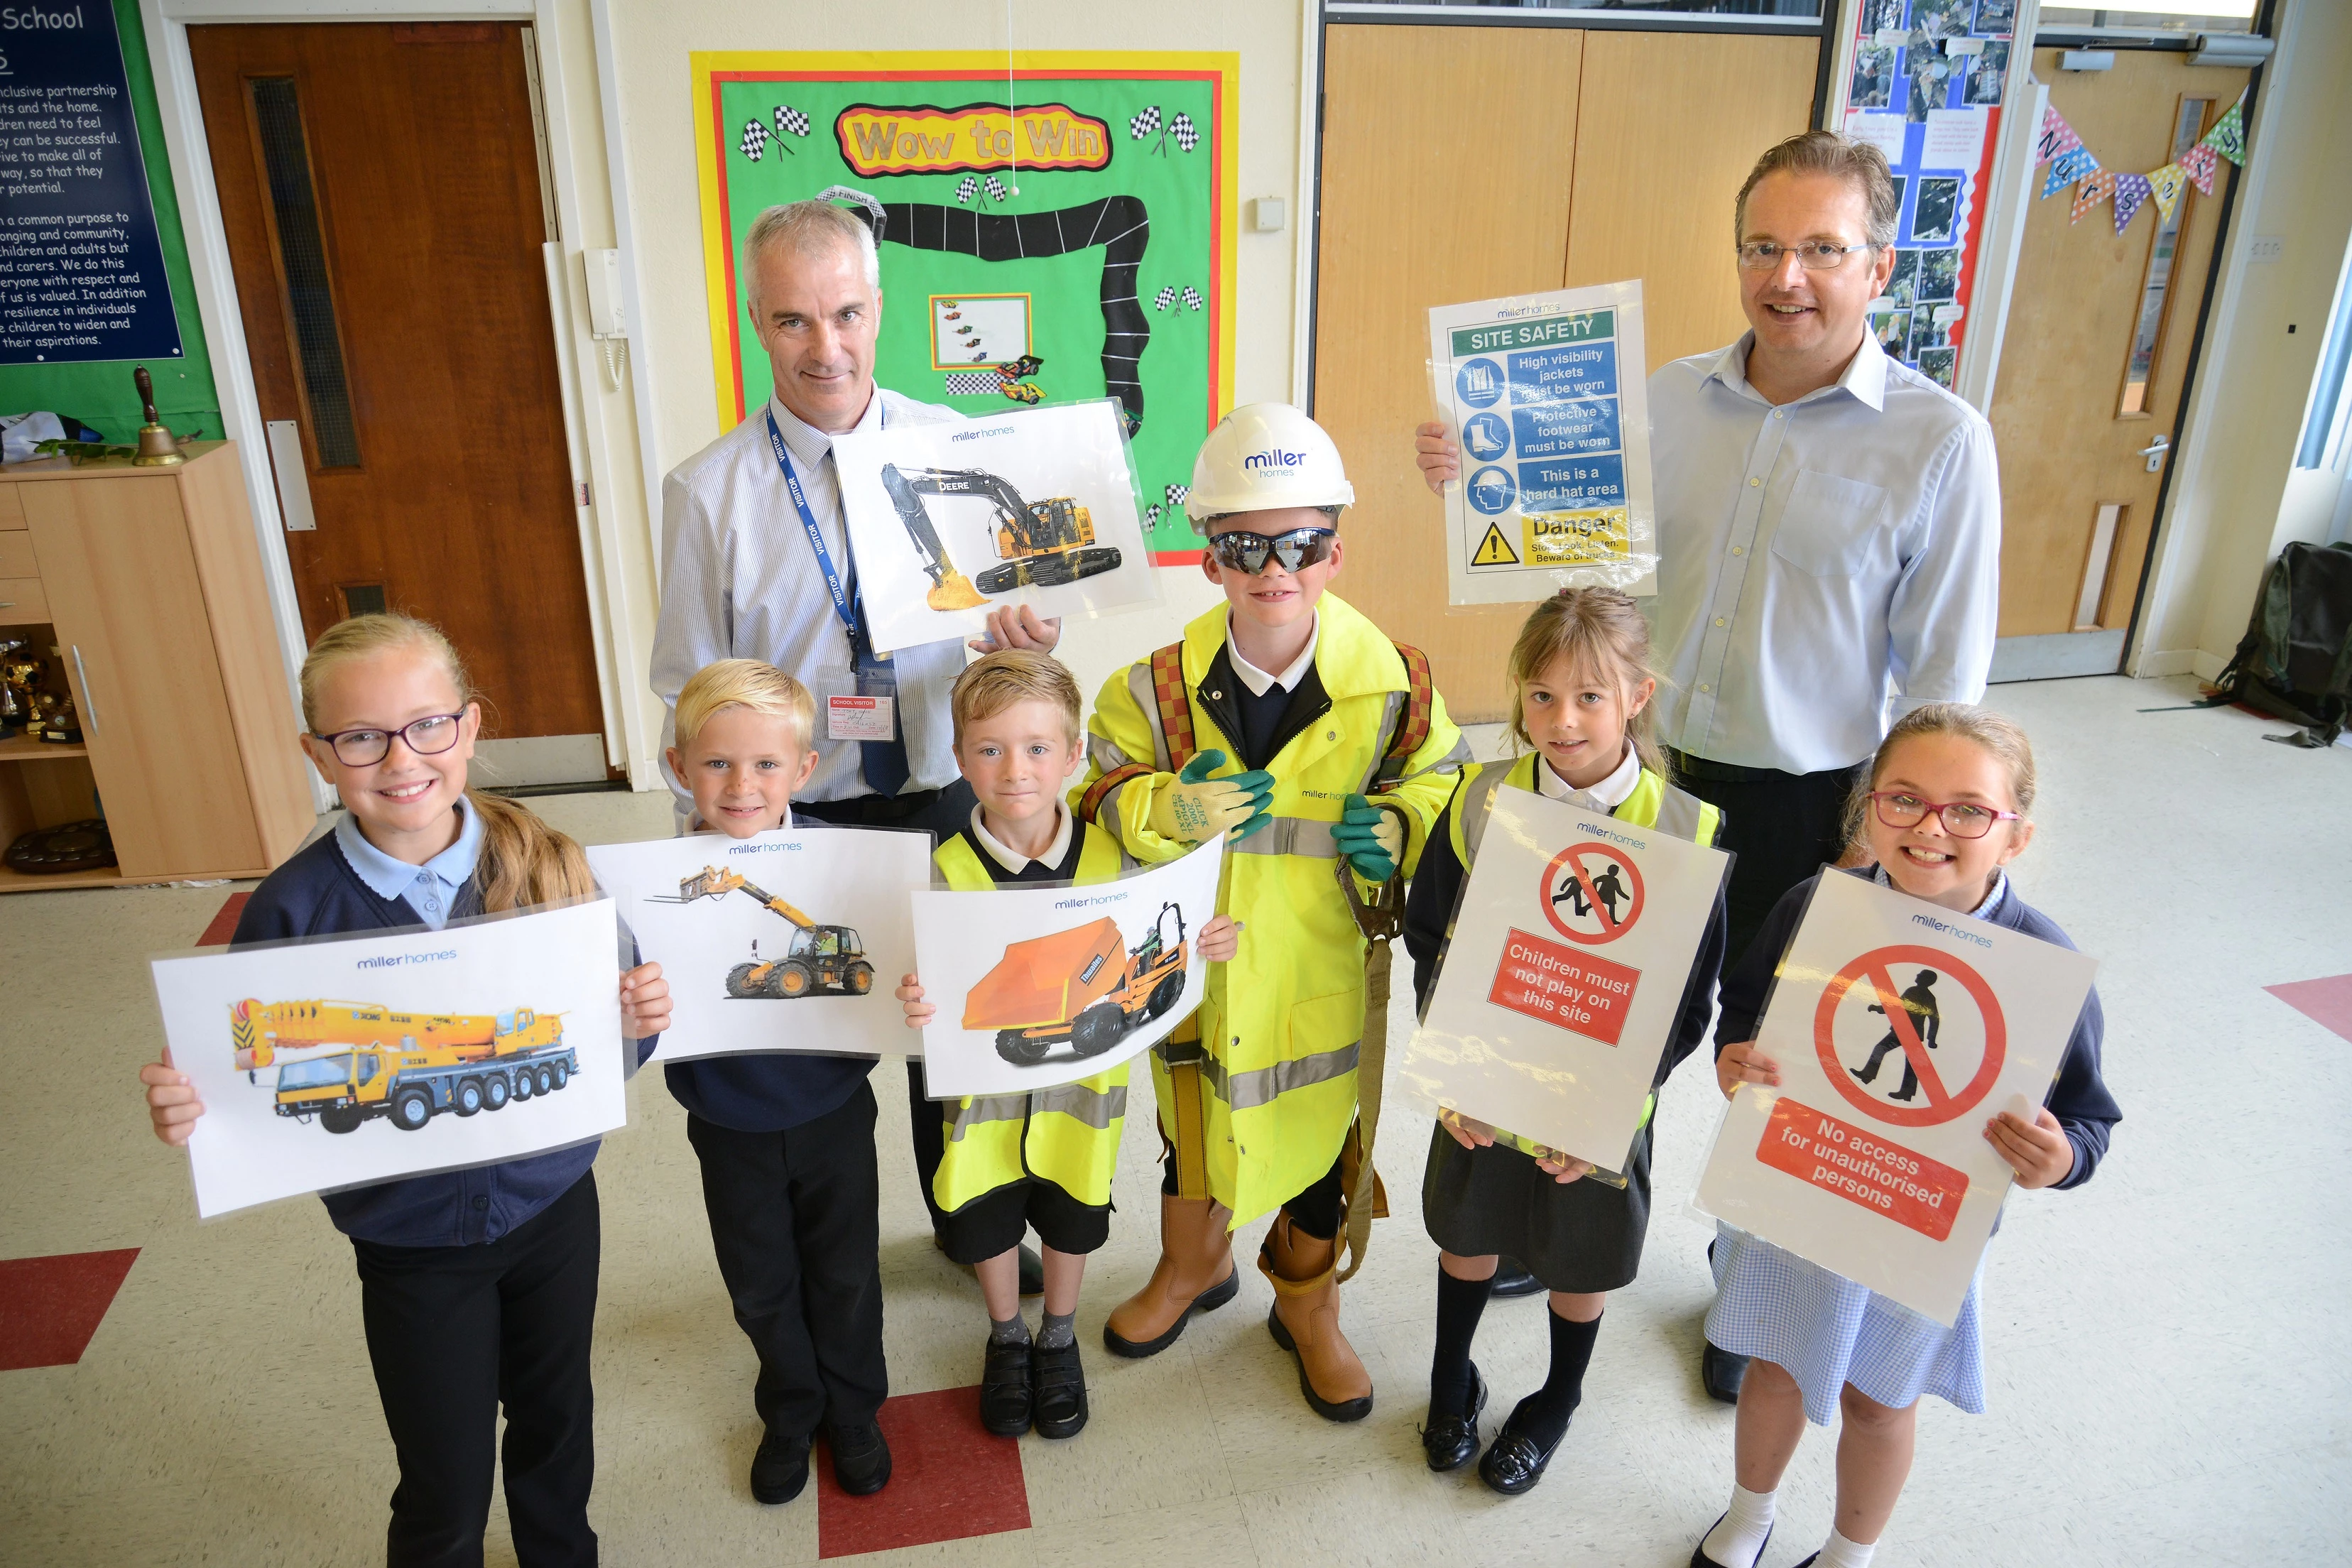 Red Row School pupils enjoyed an assembly on health and safety from Miller Homes